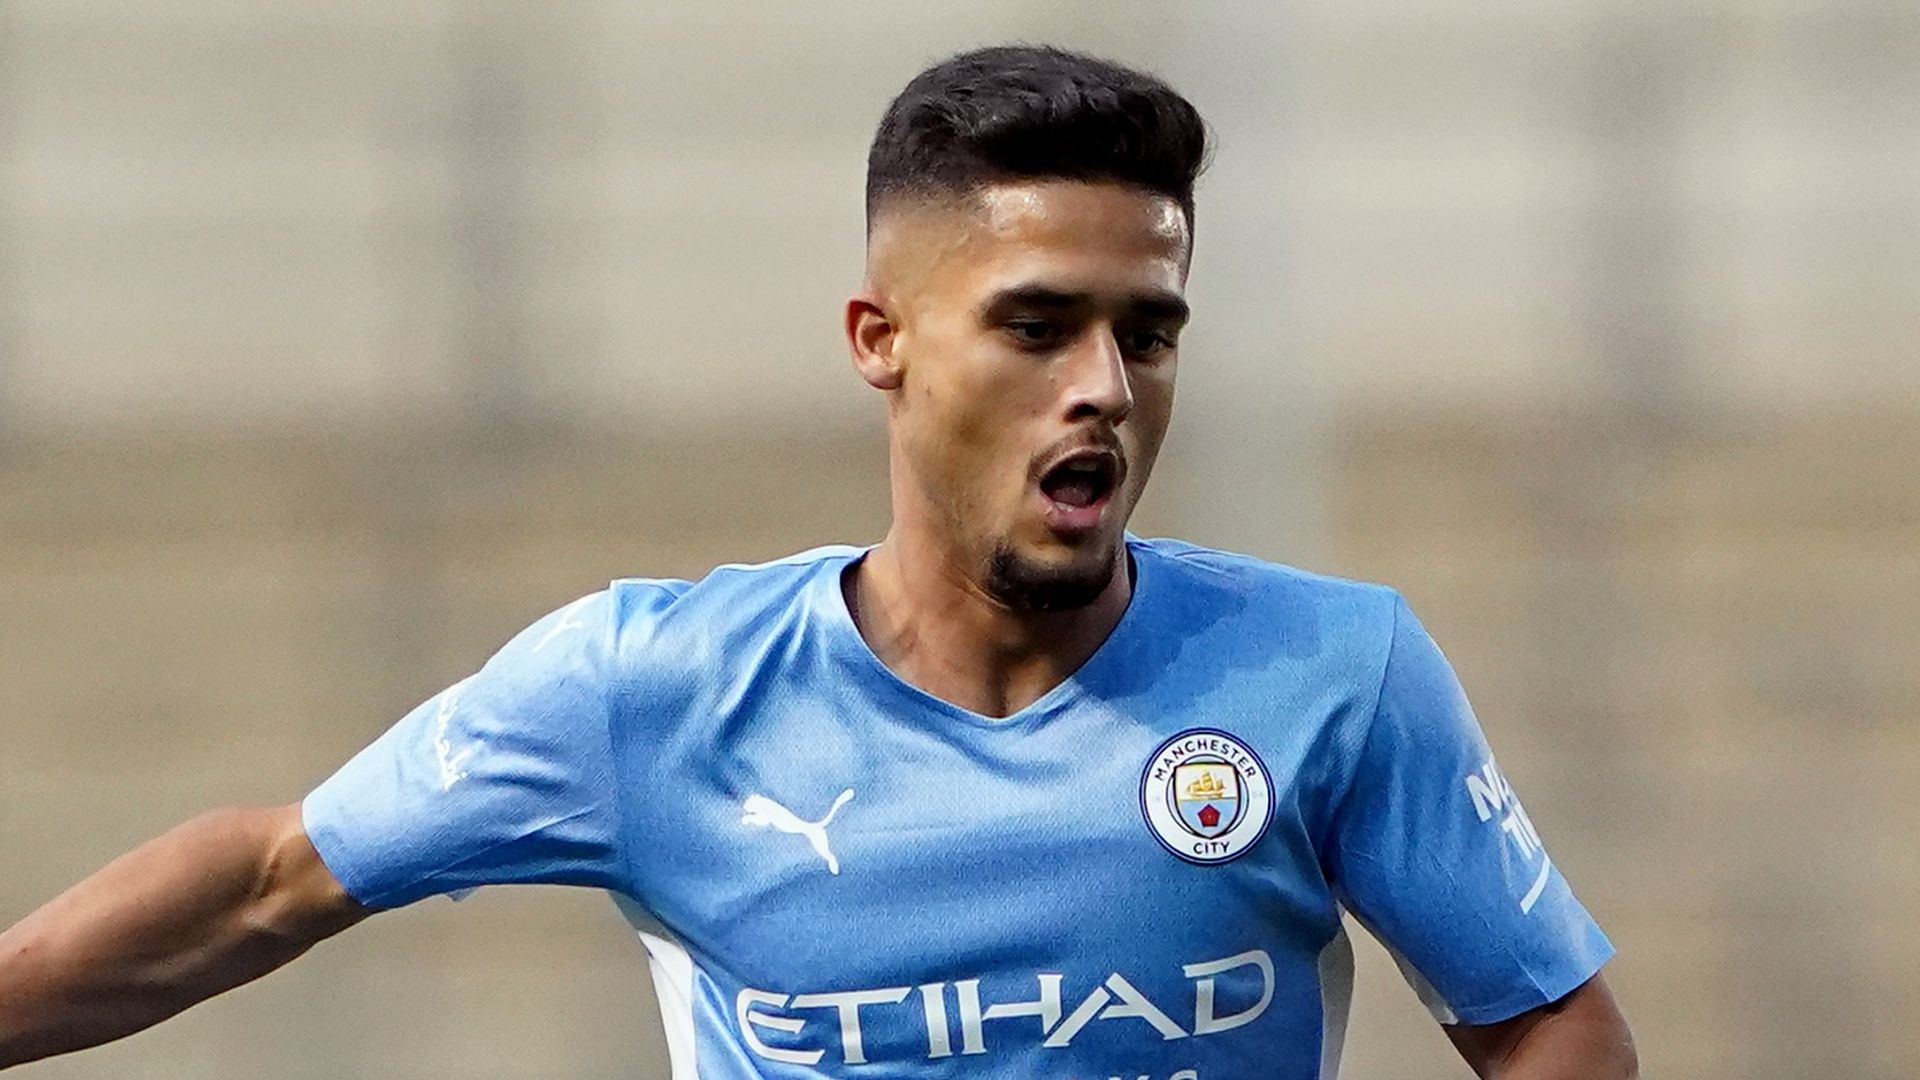 Celtic back in for Couto loan from Man City